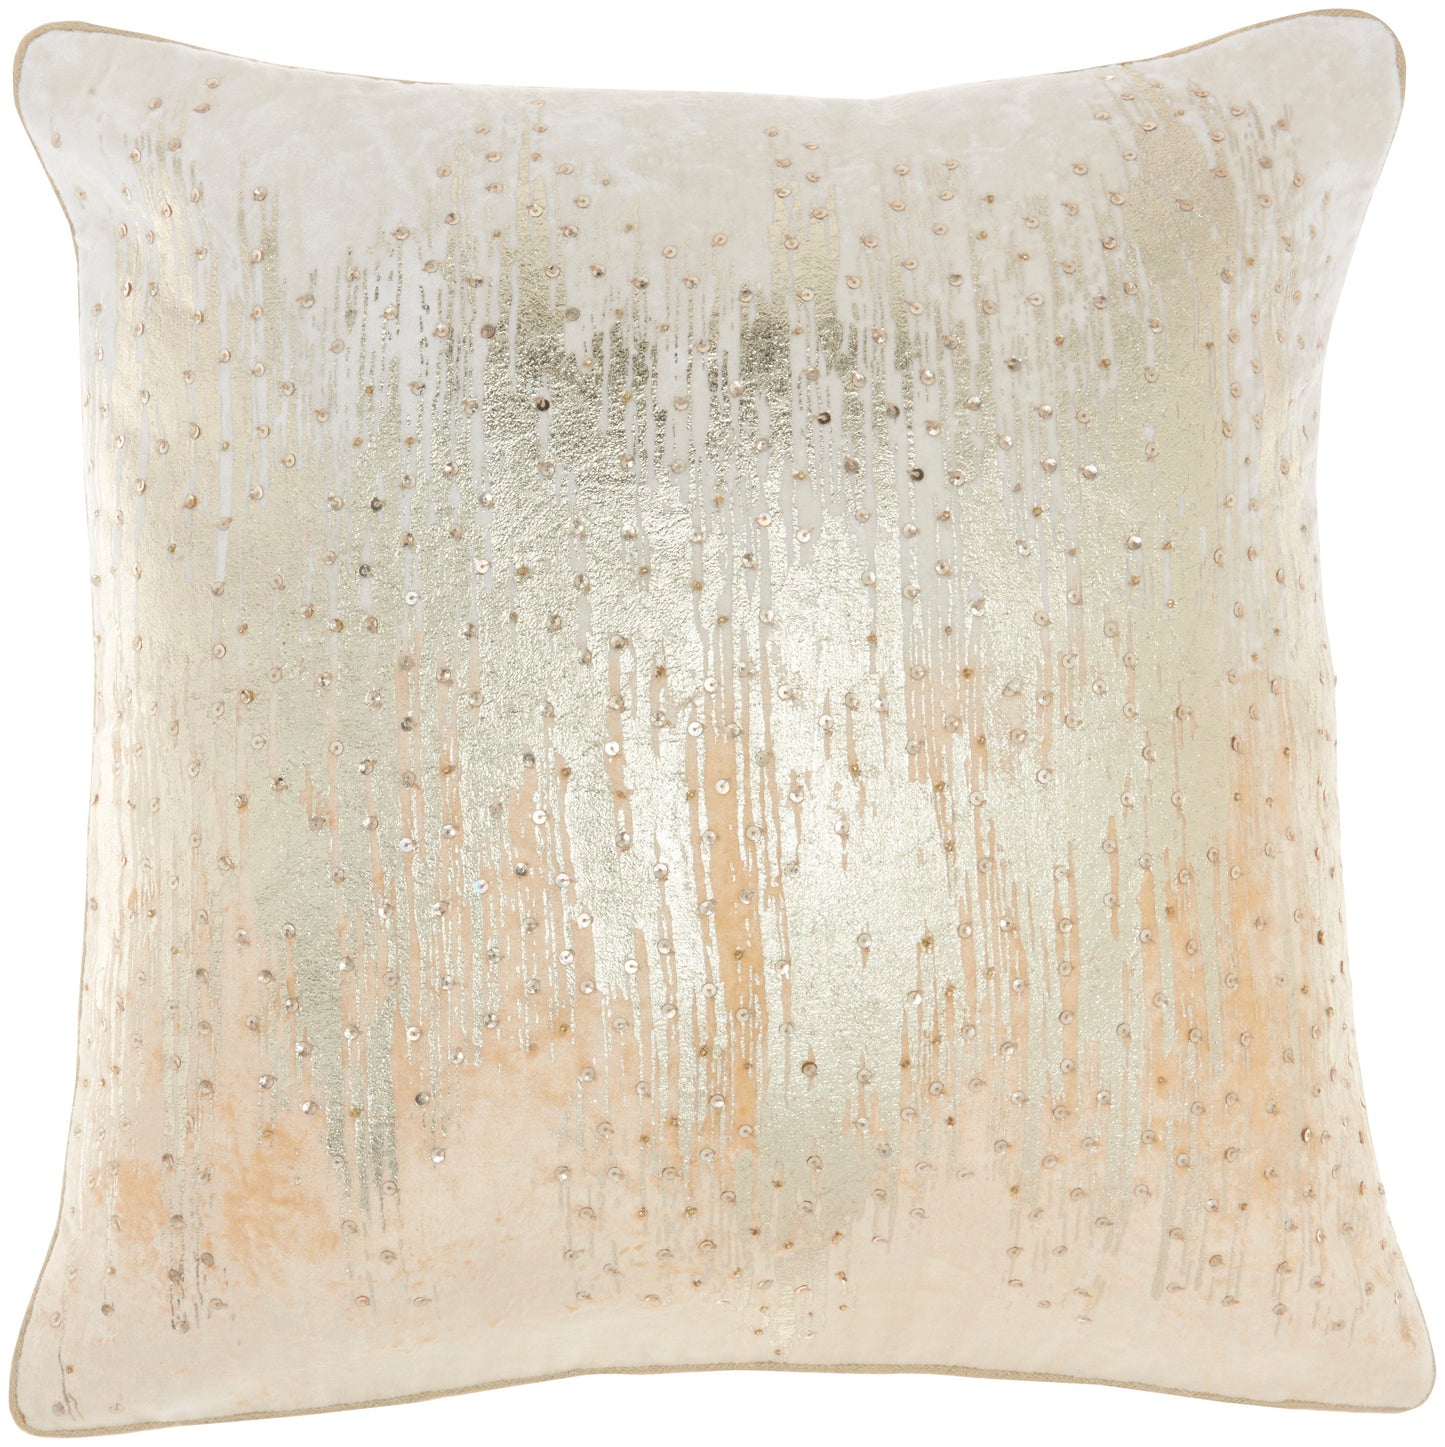 Sofia PN506 Velvet Ombre Met Sequins Throw Pillow From Mina Victory By Nourison Rugs